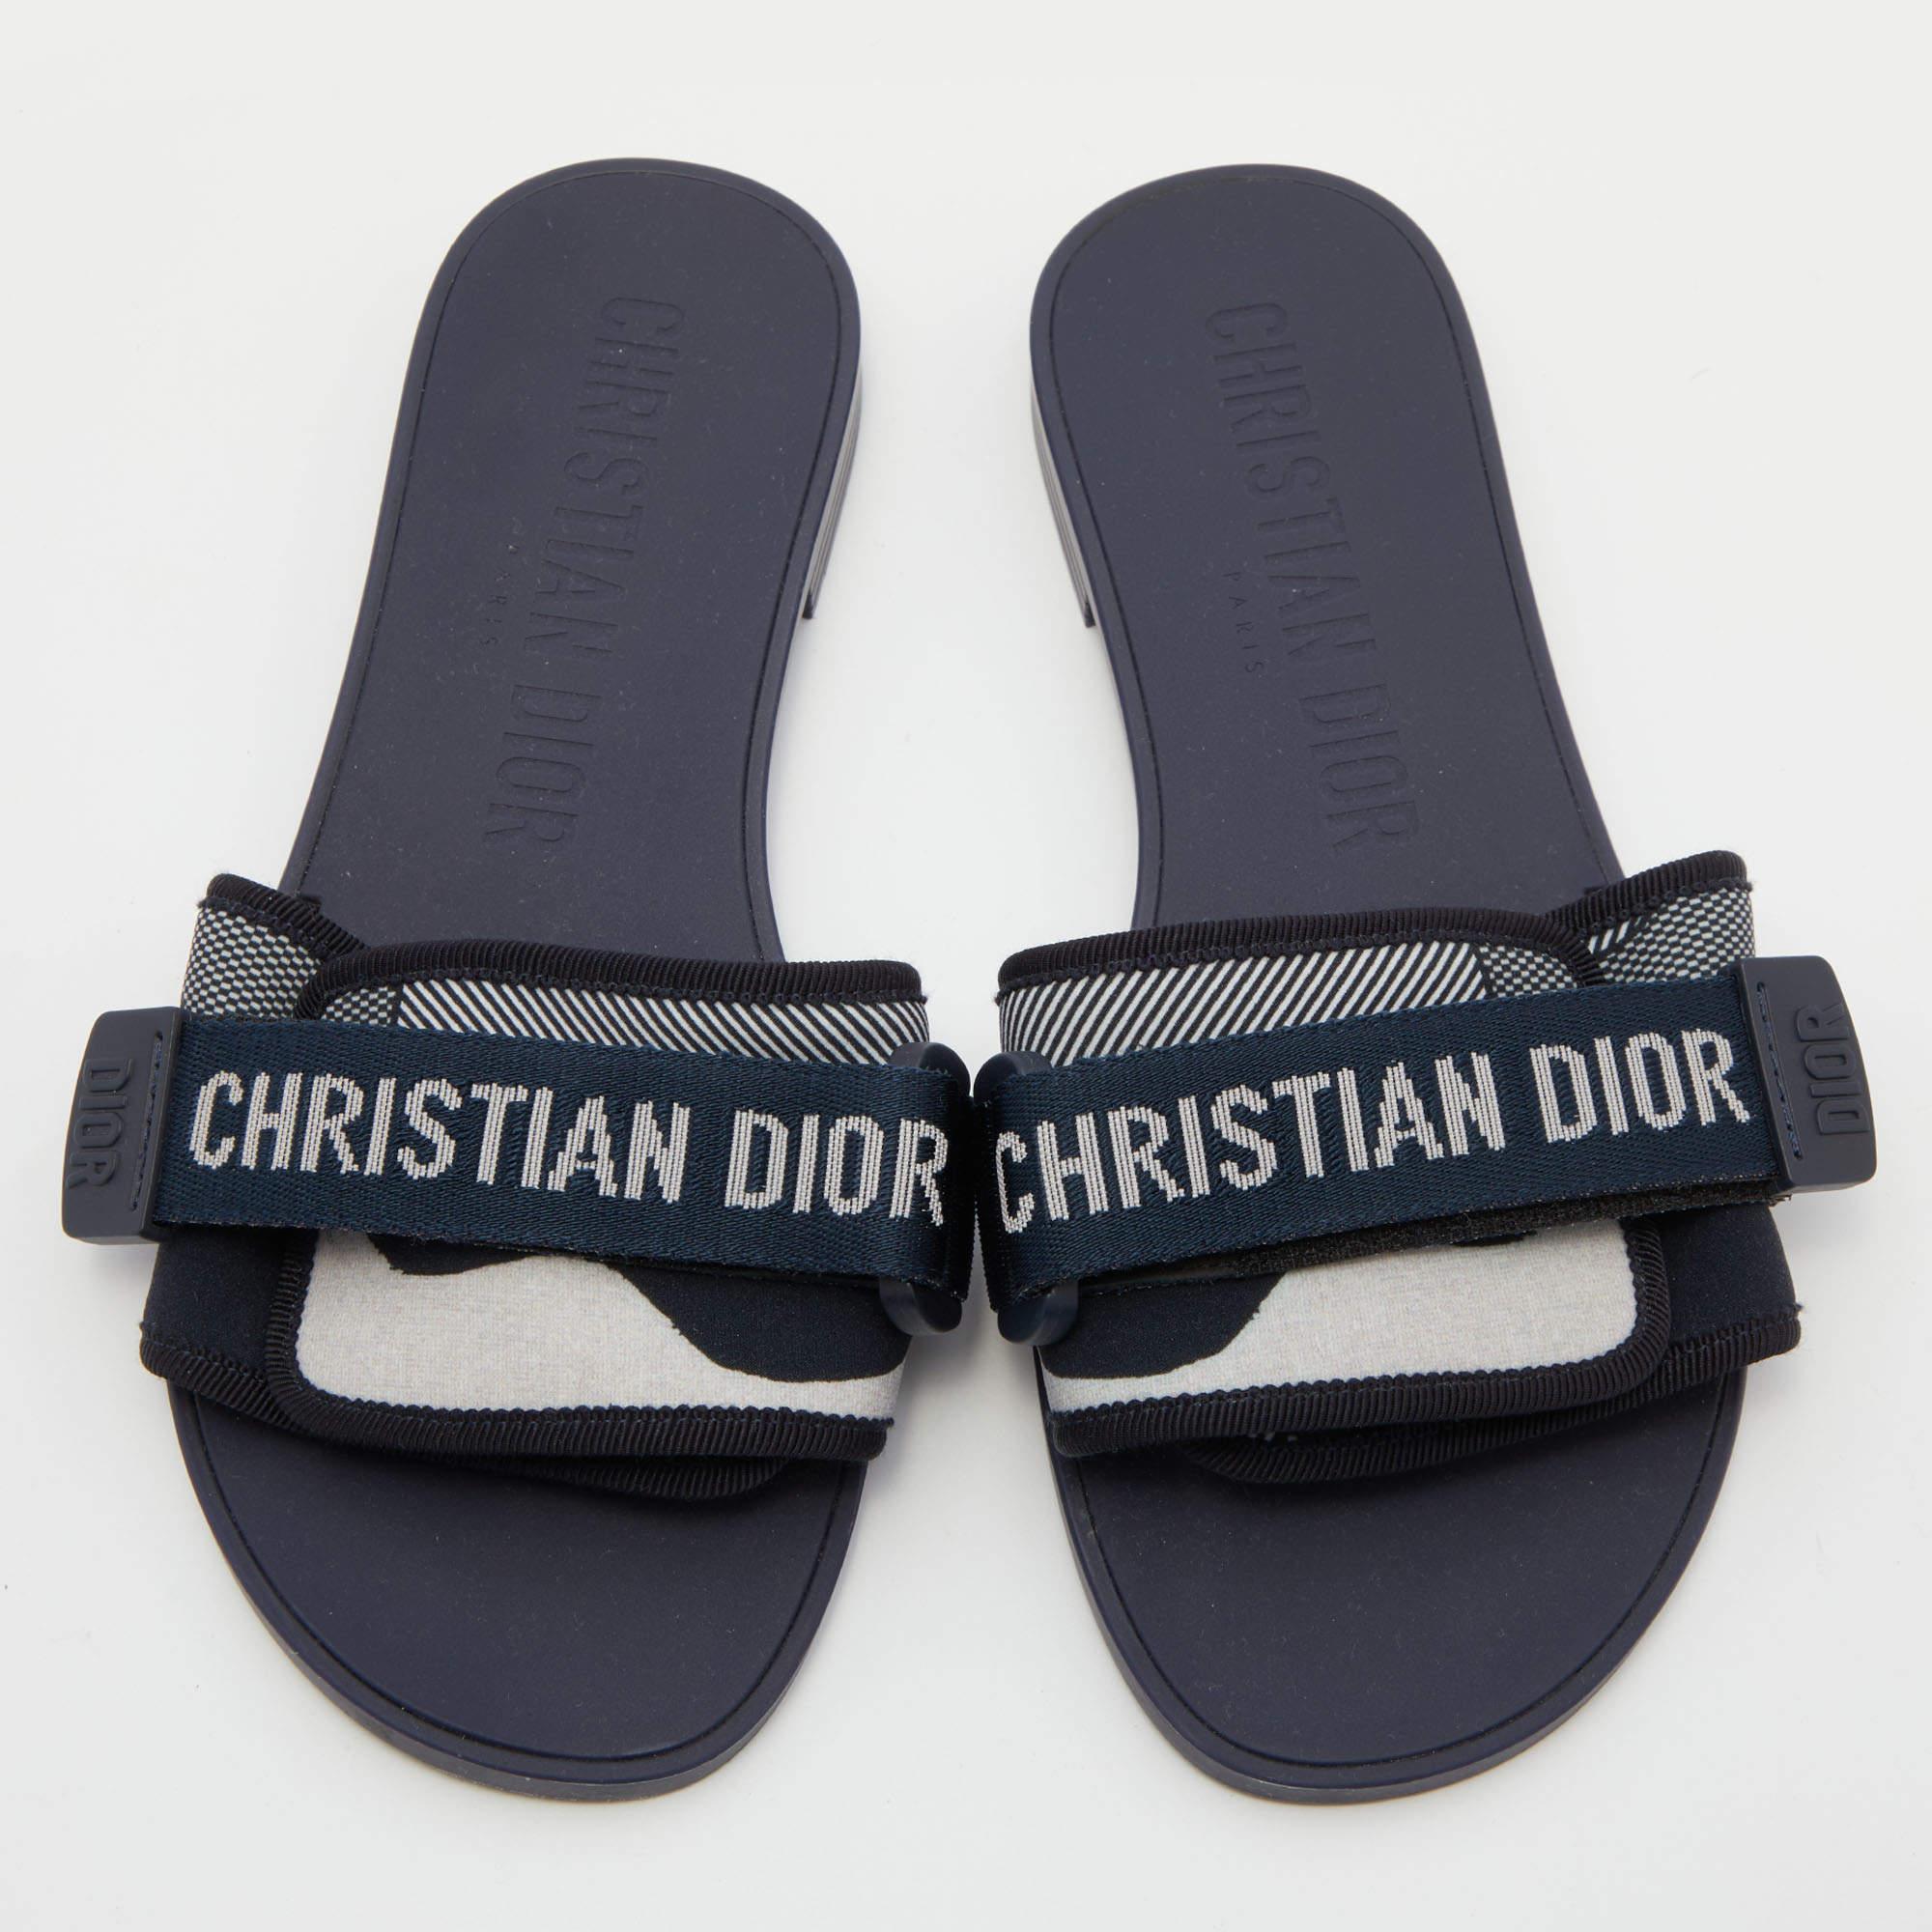 Bring comfort and luxury to your closet with these Dio(r)evolution flat slides from the House of Dior. Crafted using printed fabric, they flaunt logo prints on the upper strap, which grants them a signature look. Their mesh lining and easy slip-on